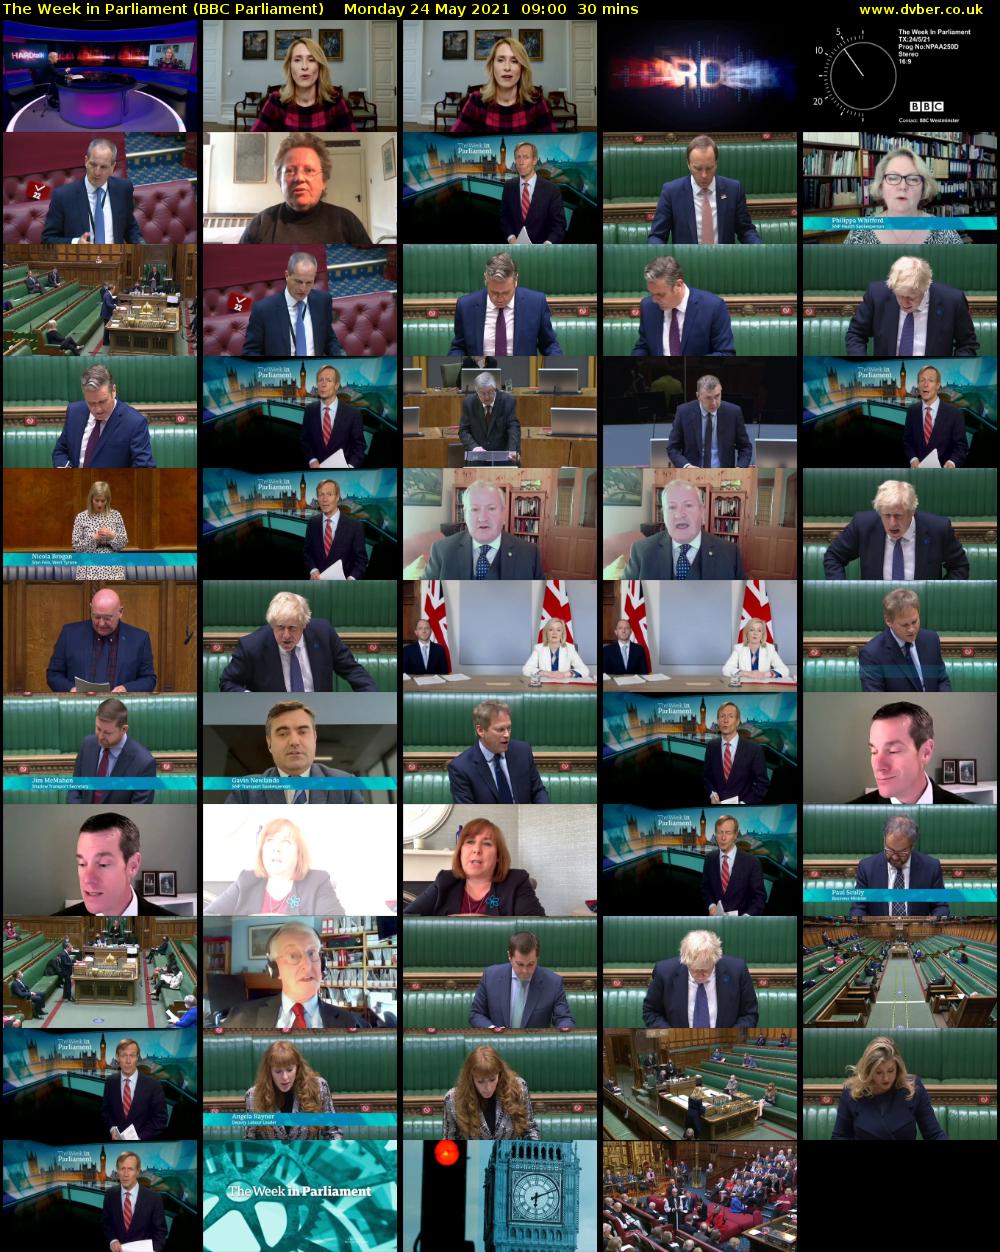 The Week in Parliament (BBC Parliament) Monday 24 May 2021 09:00 - 09:30